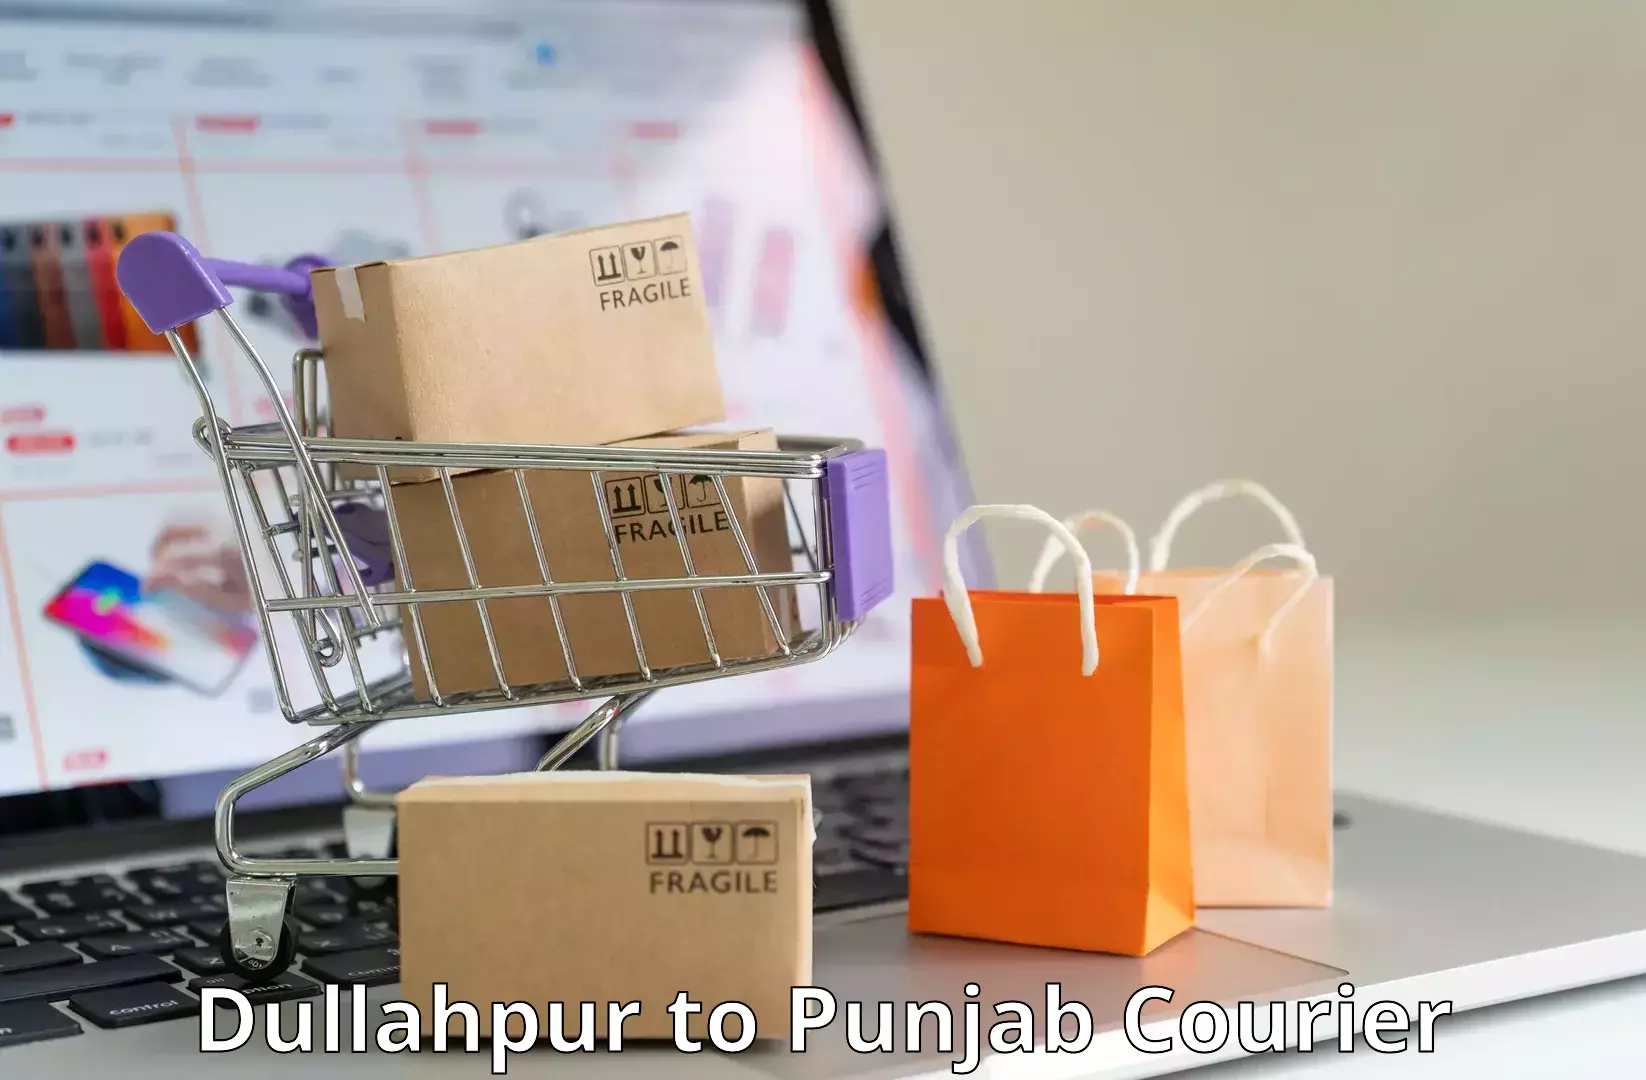 Express delivery network Dullahpur to Punjab